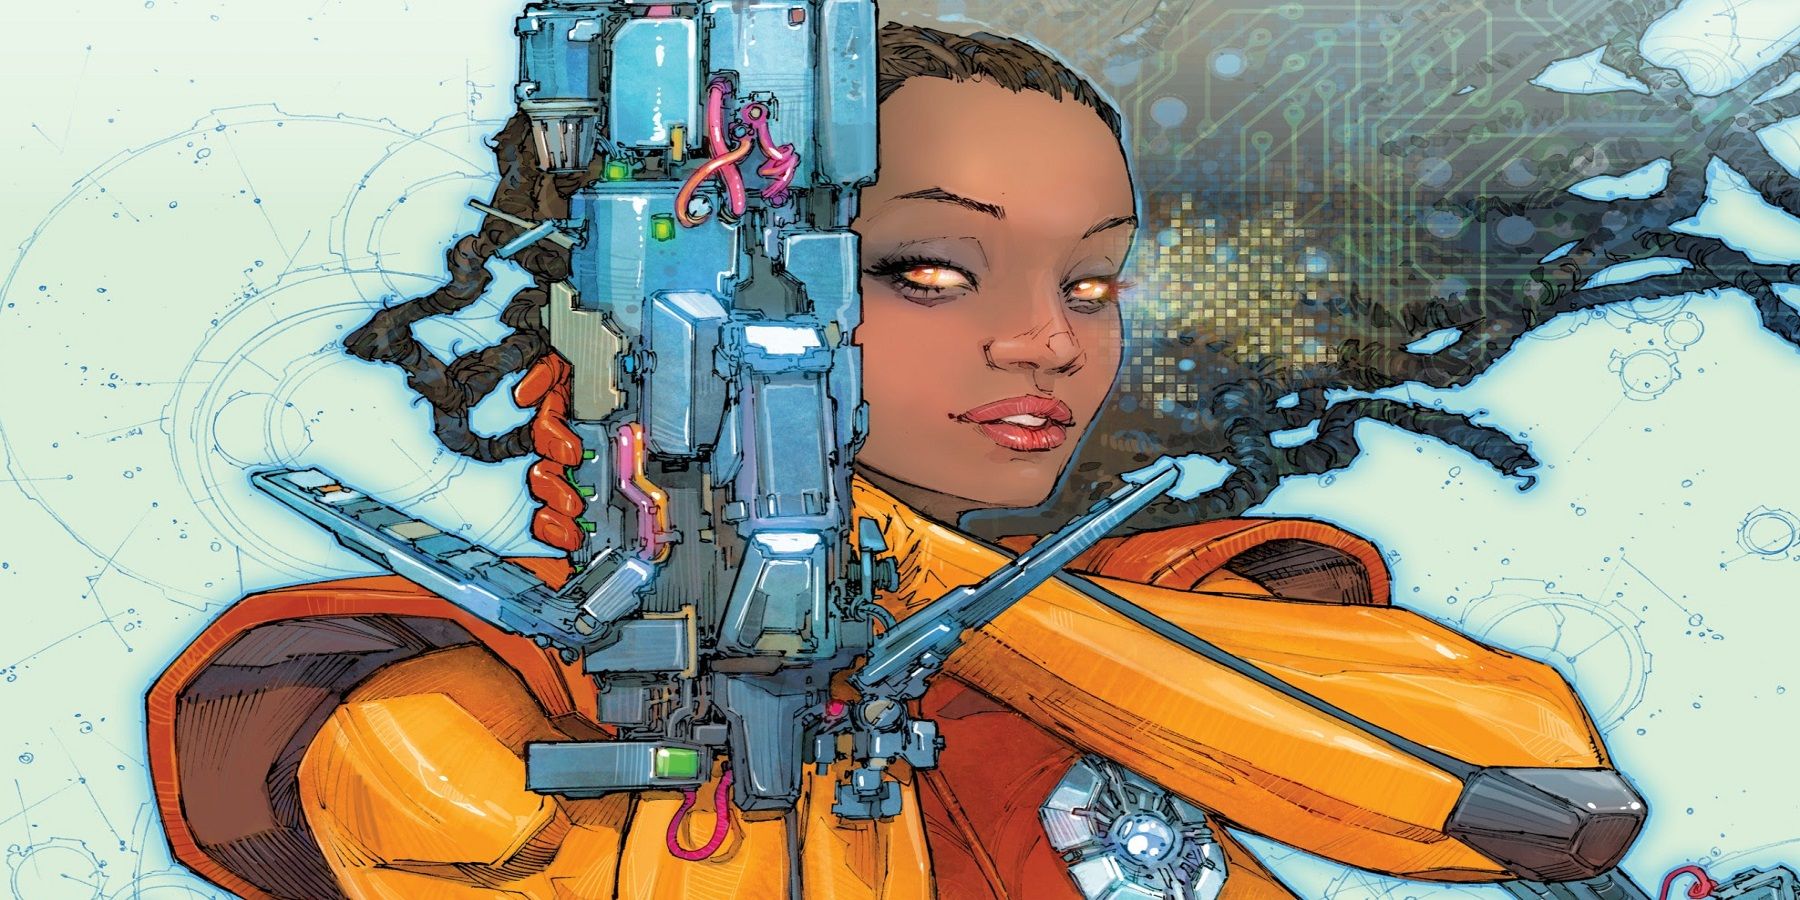 Valiant Comics' Livewire holding an advanced gun in her arm